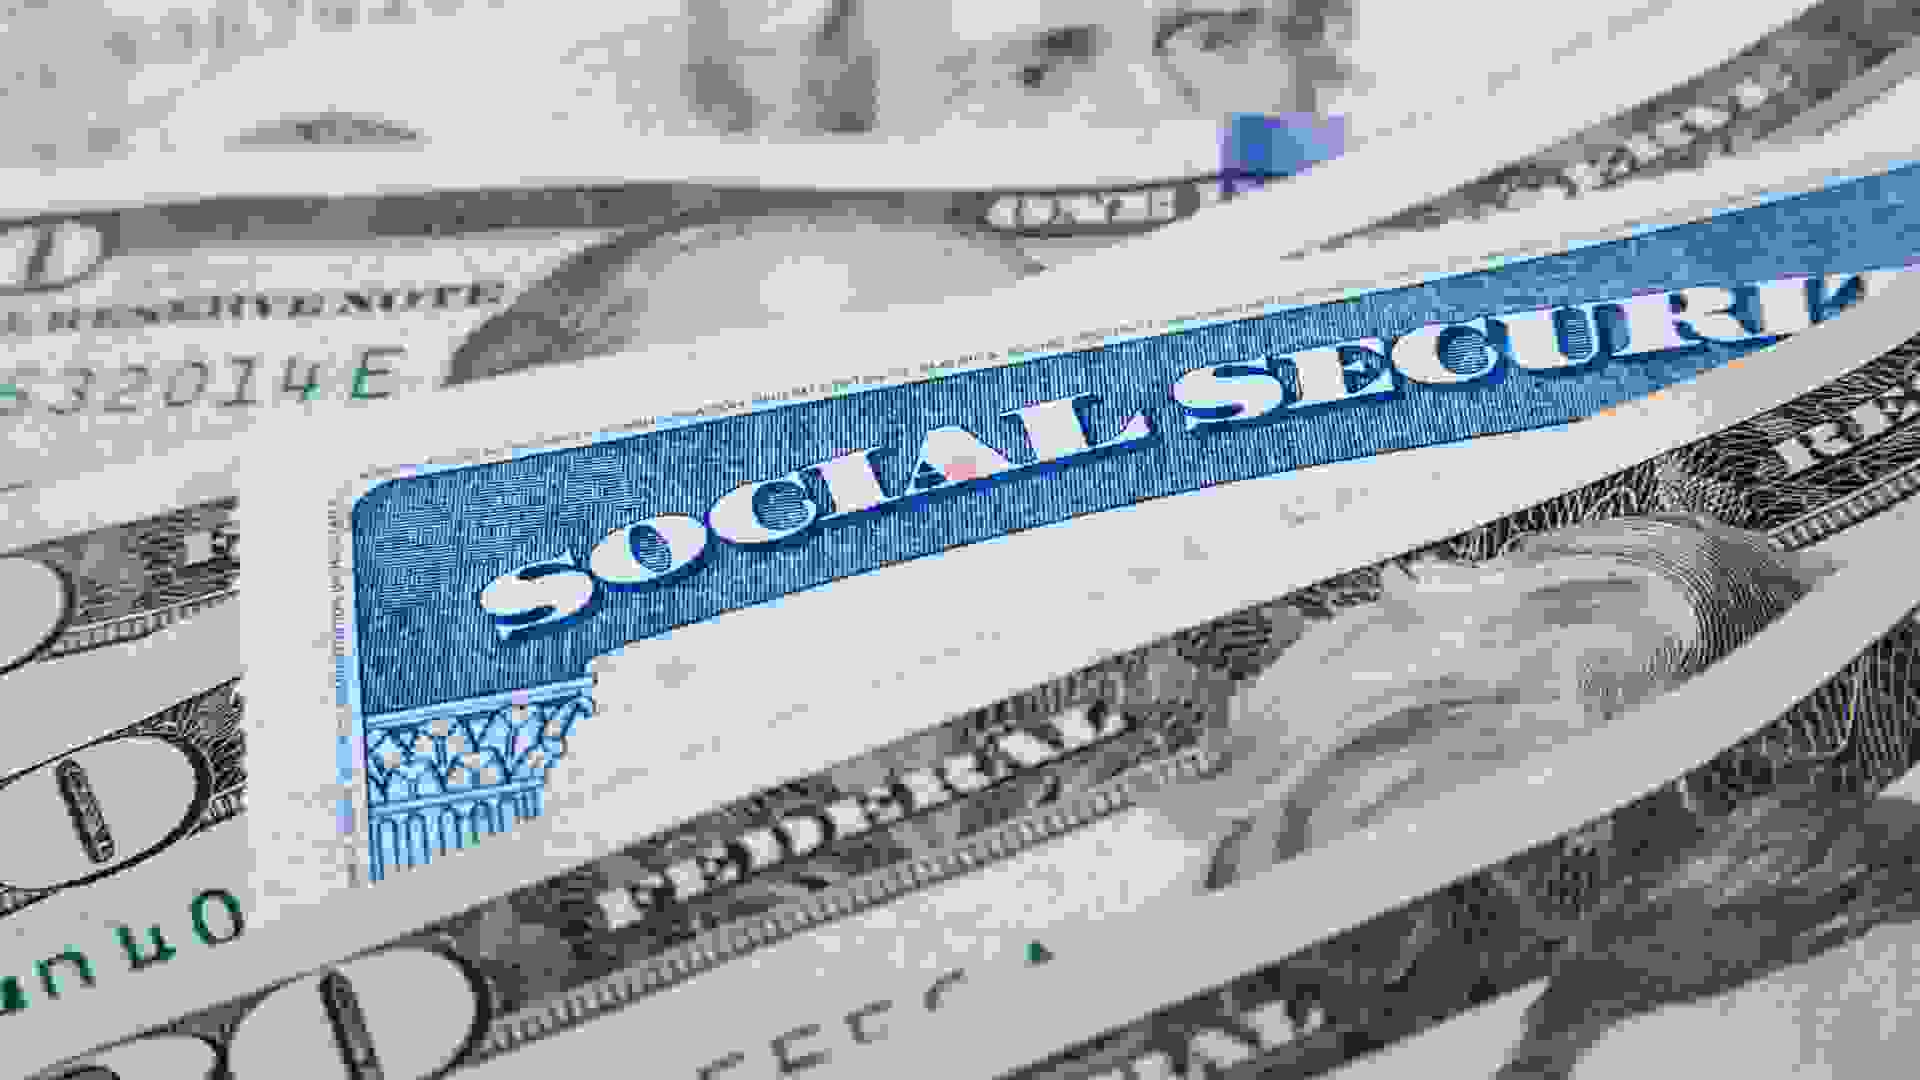 Social security card and American money dollar bills close up concept.